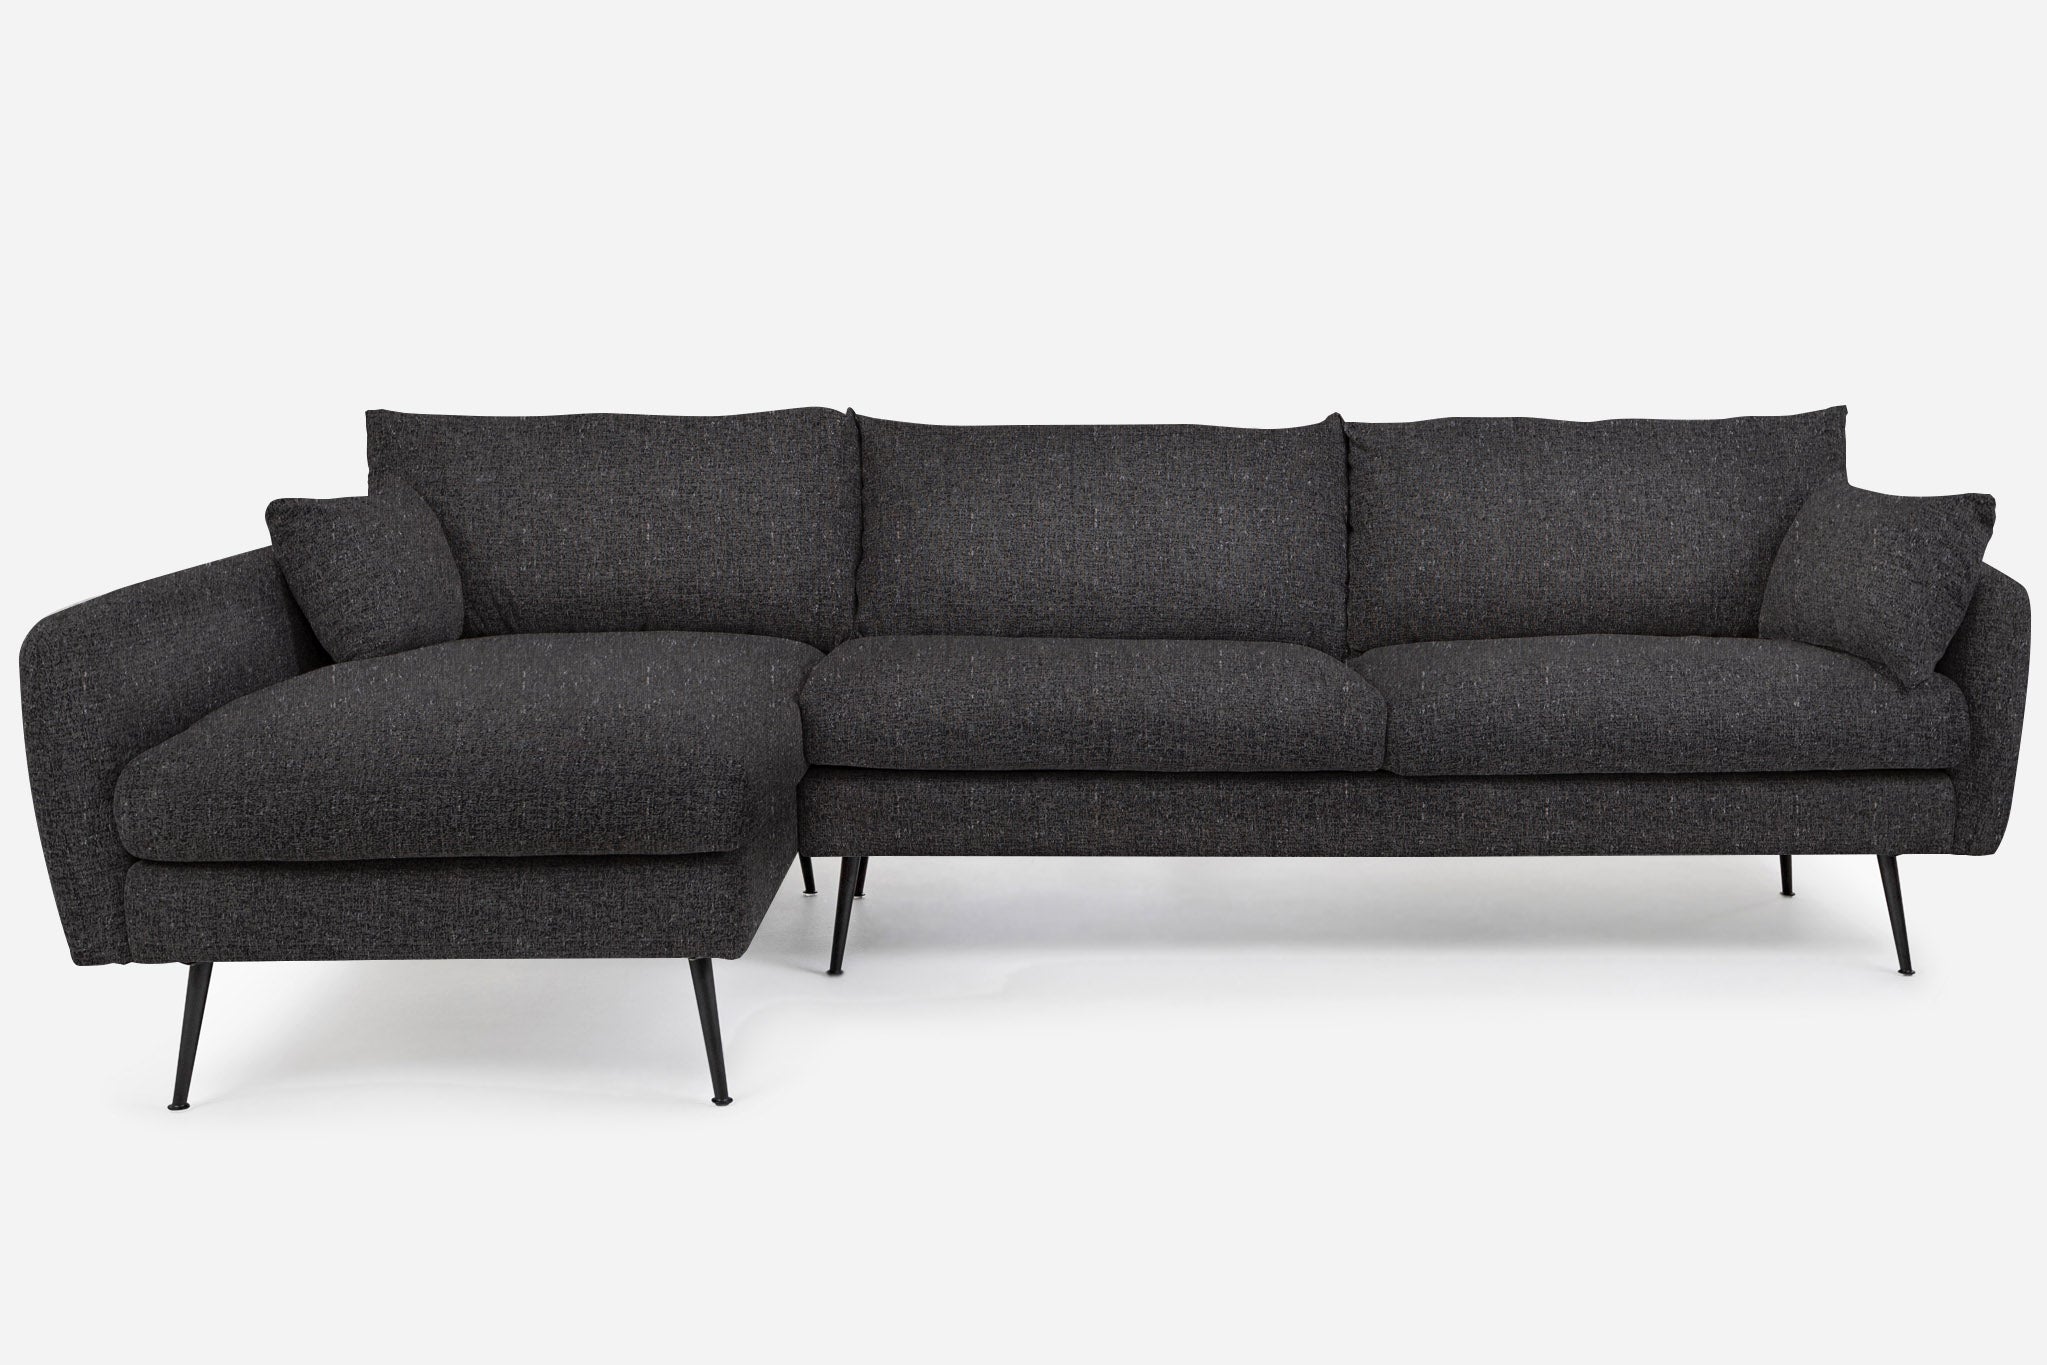 park sectional sofa shown in charcoal with black legs left facing